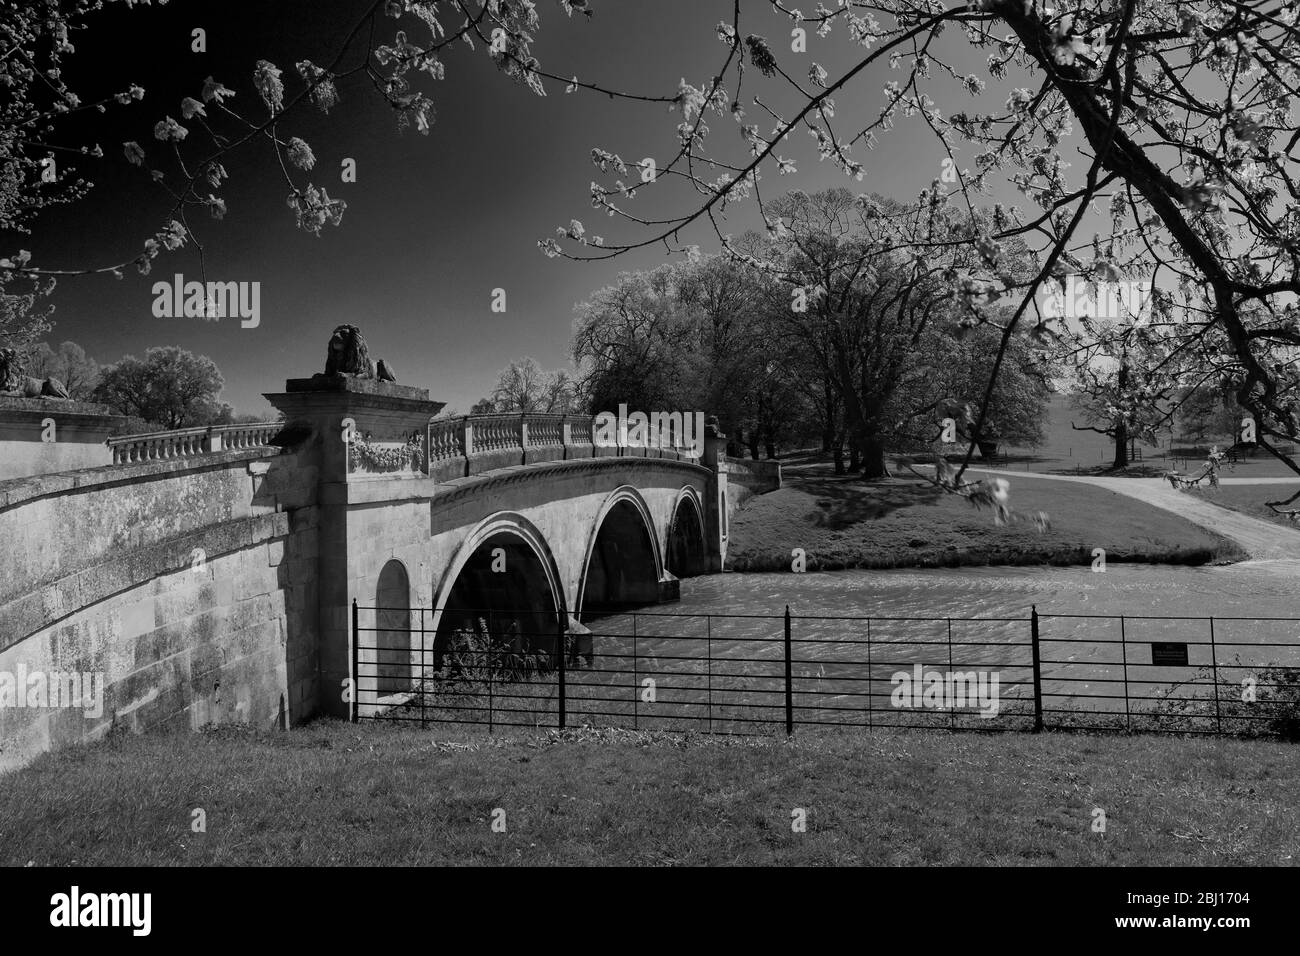 The Lion Bridge, Burghley house, Elizabethan Stately Home on the border of Cambridgeshire and Lincolnshire, England. Stock Photo